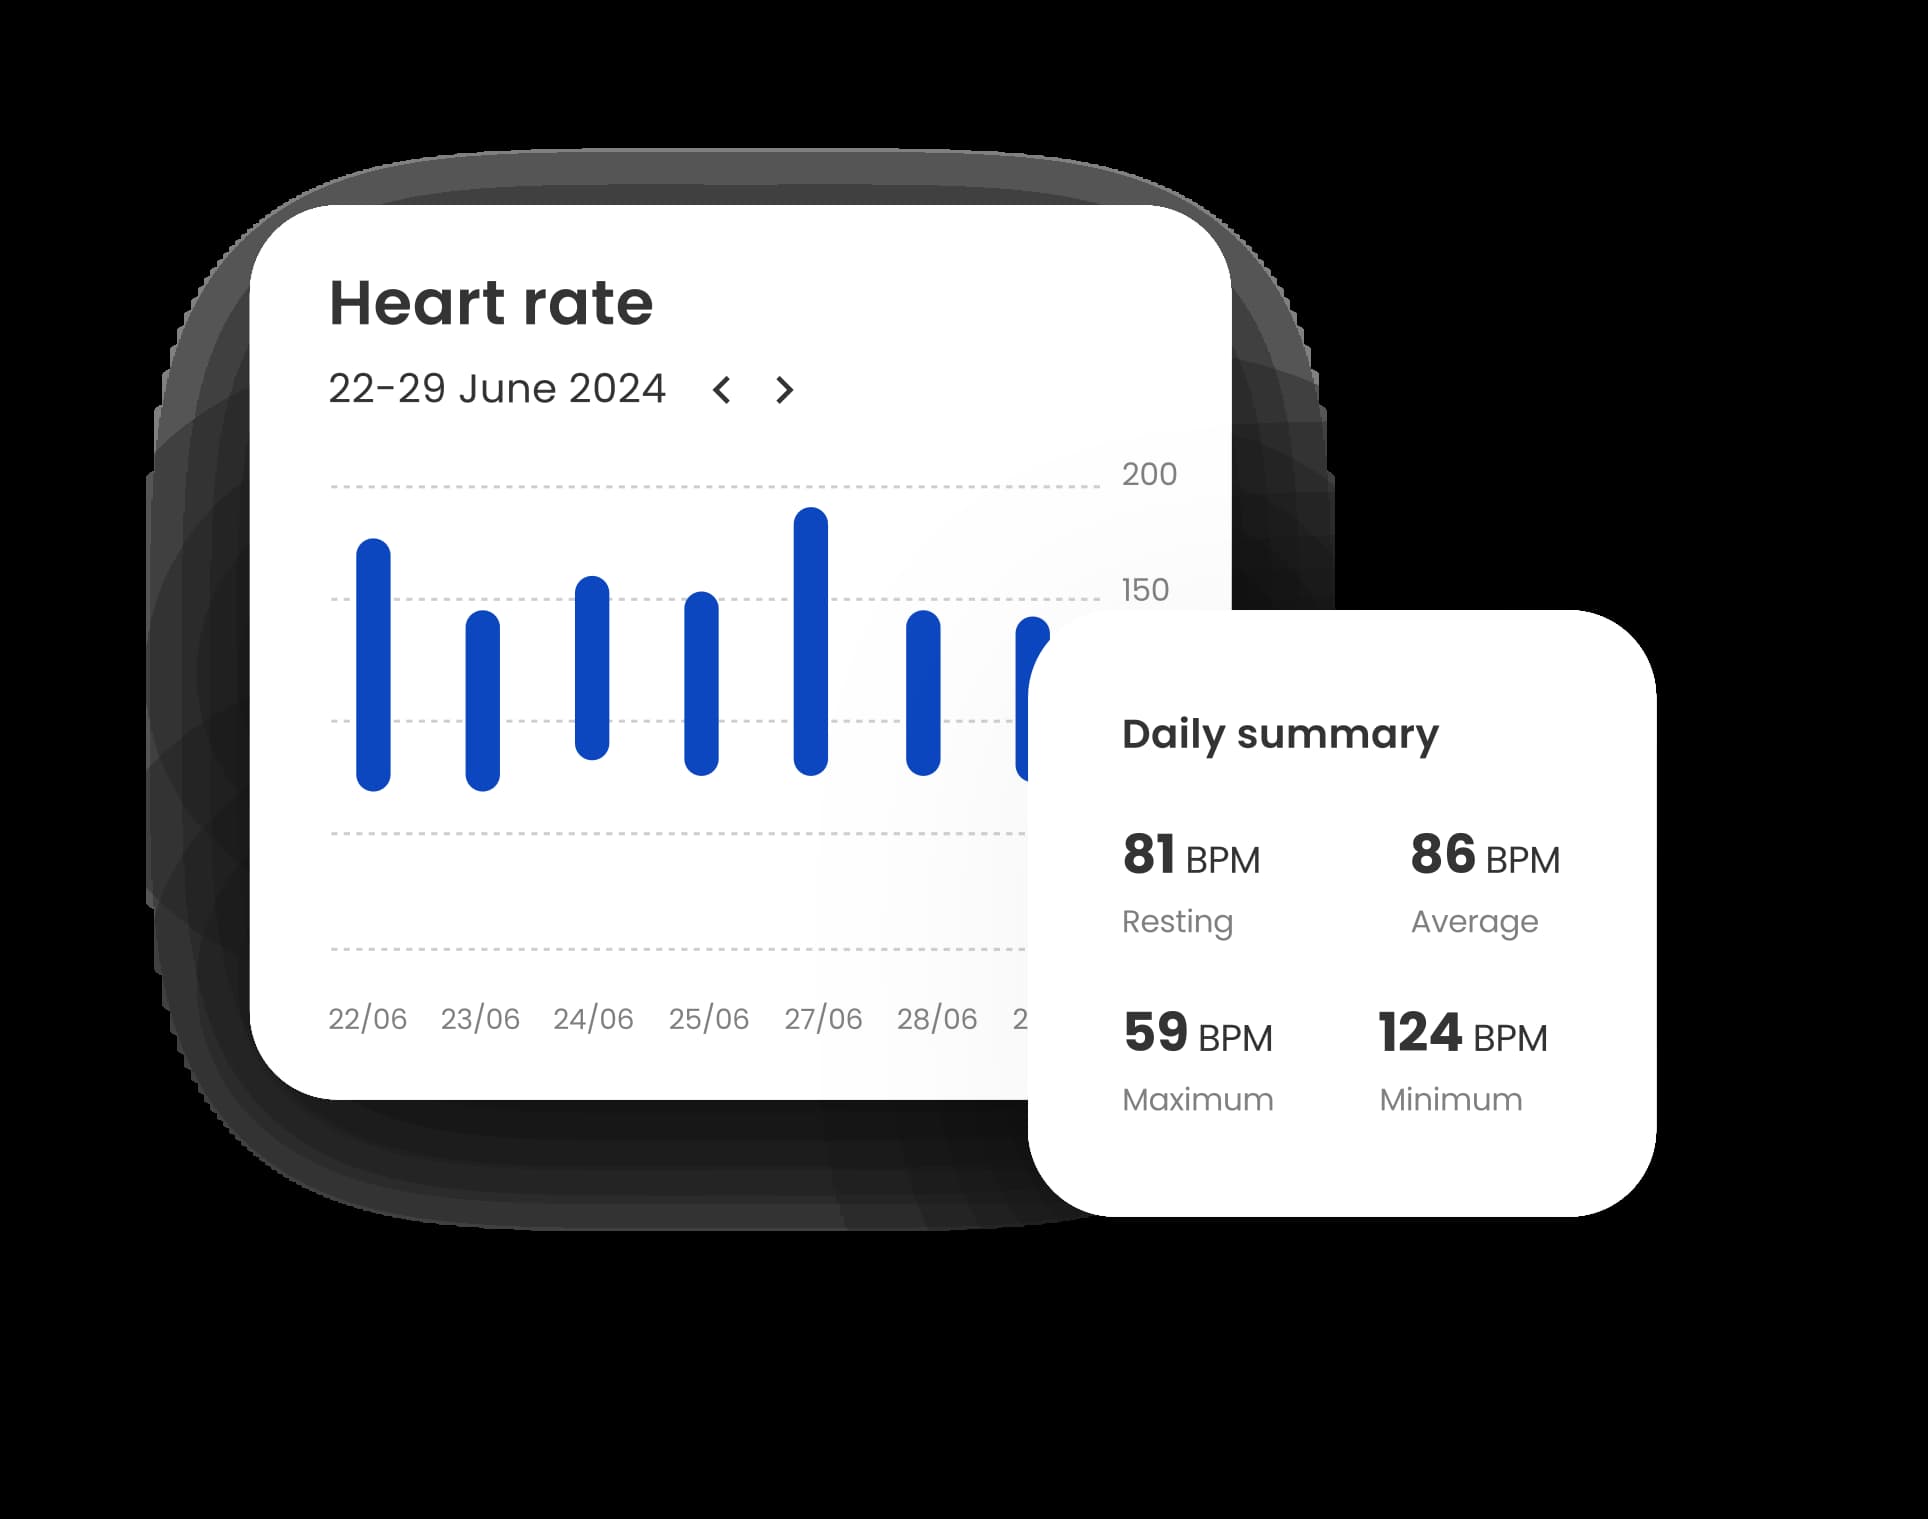 Two user interface elements of a health app developed by Revolve Healthcare, showing heart rate trends and a daily summary of measurements